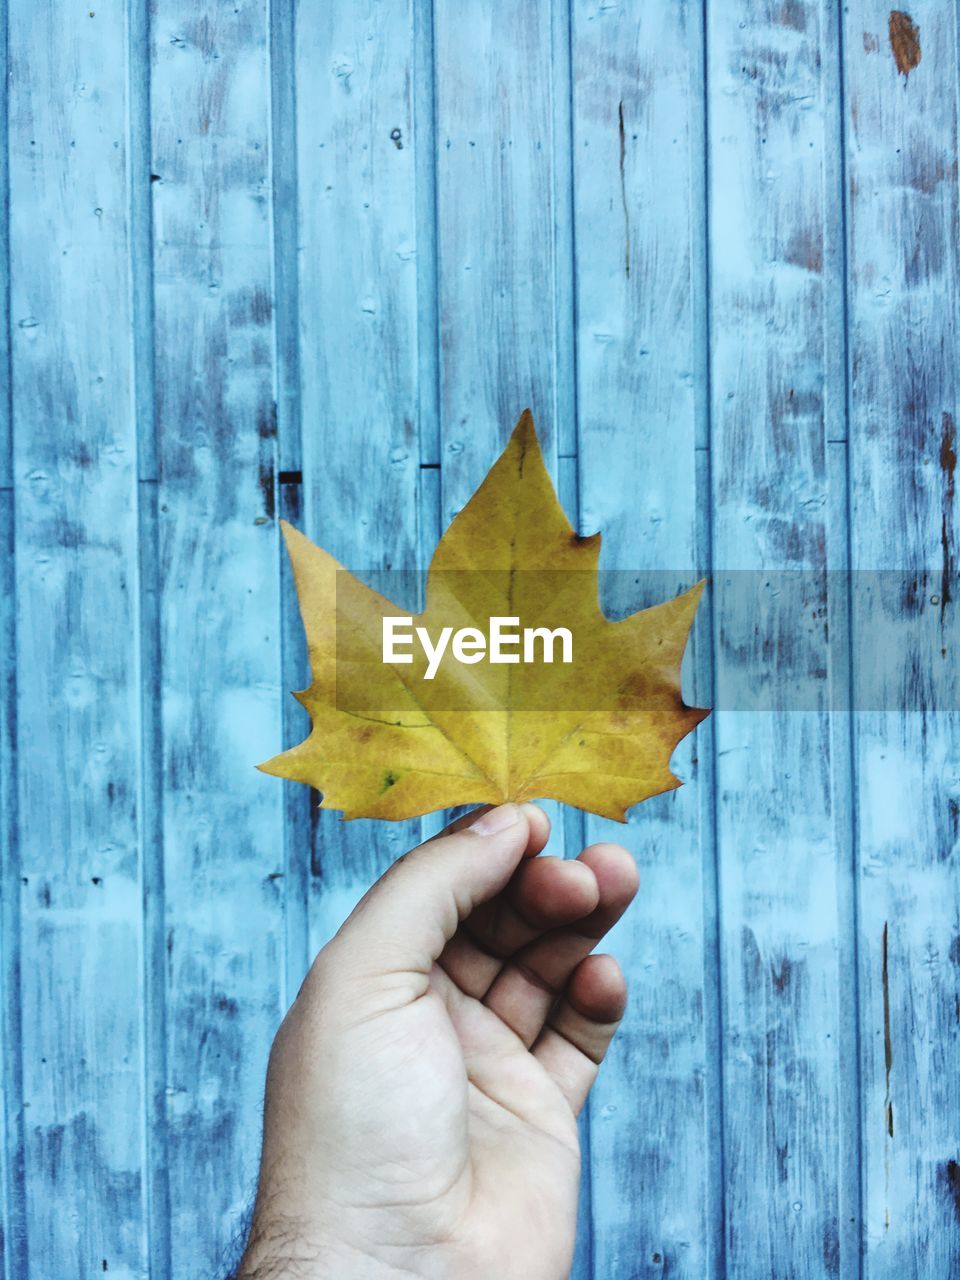 Cropped image of hand holding maple leaf against blue wooden wall